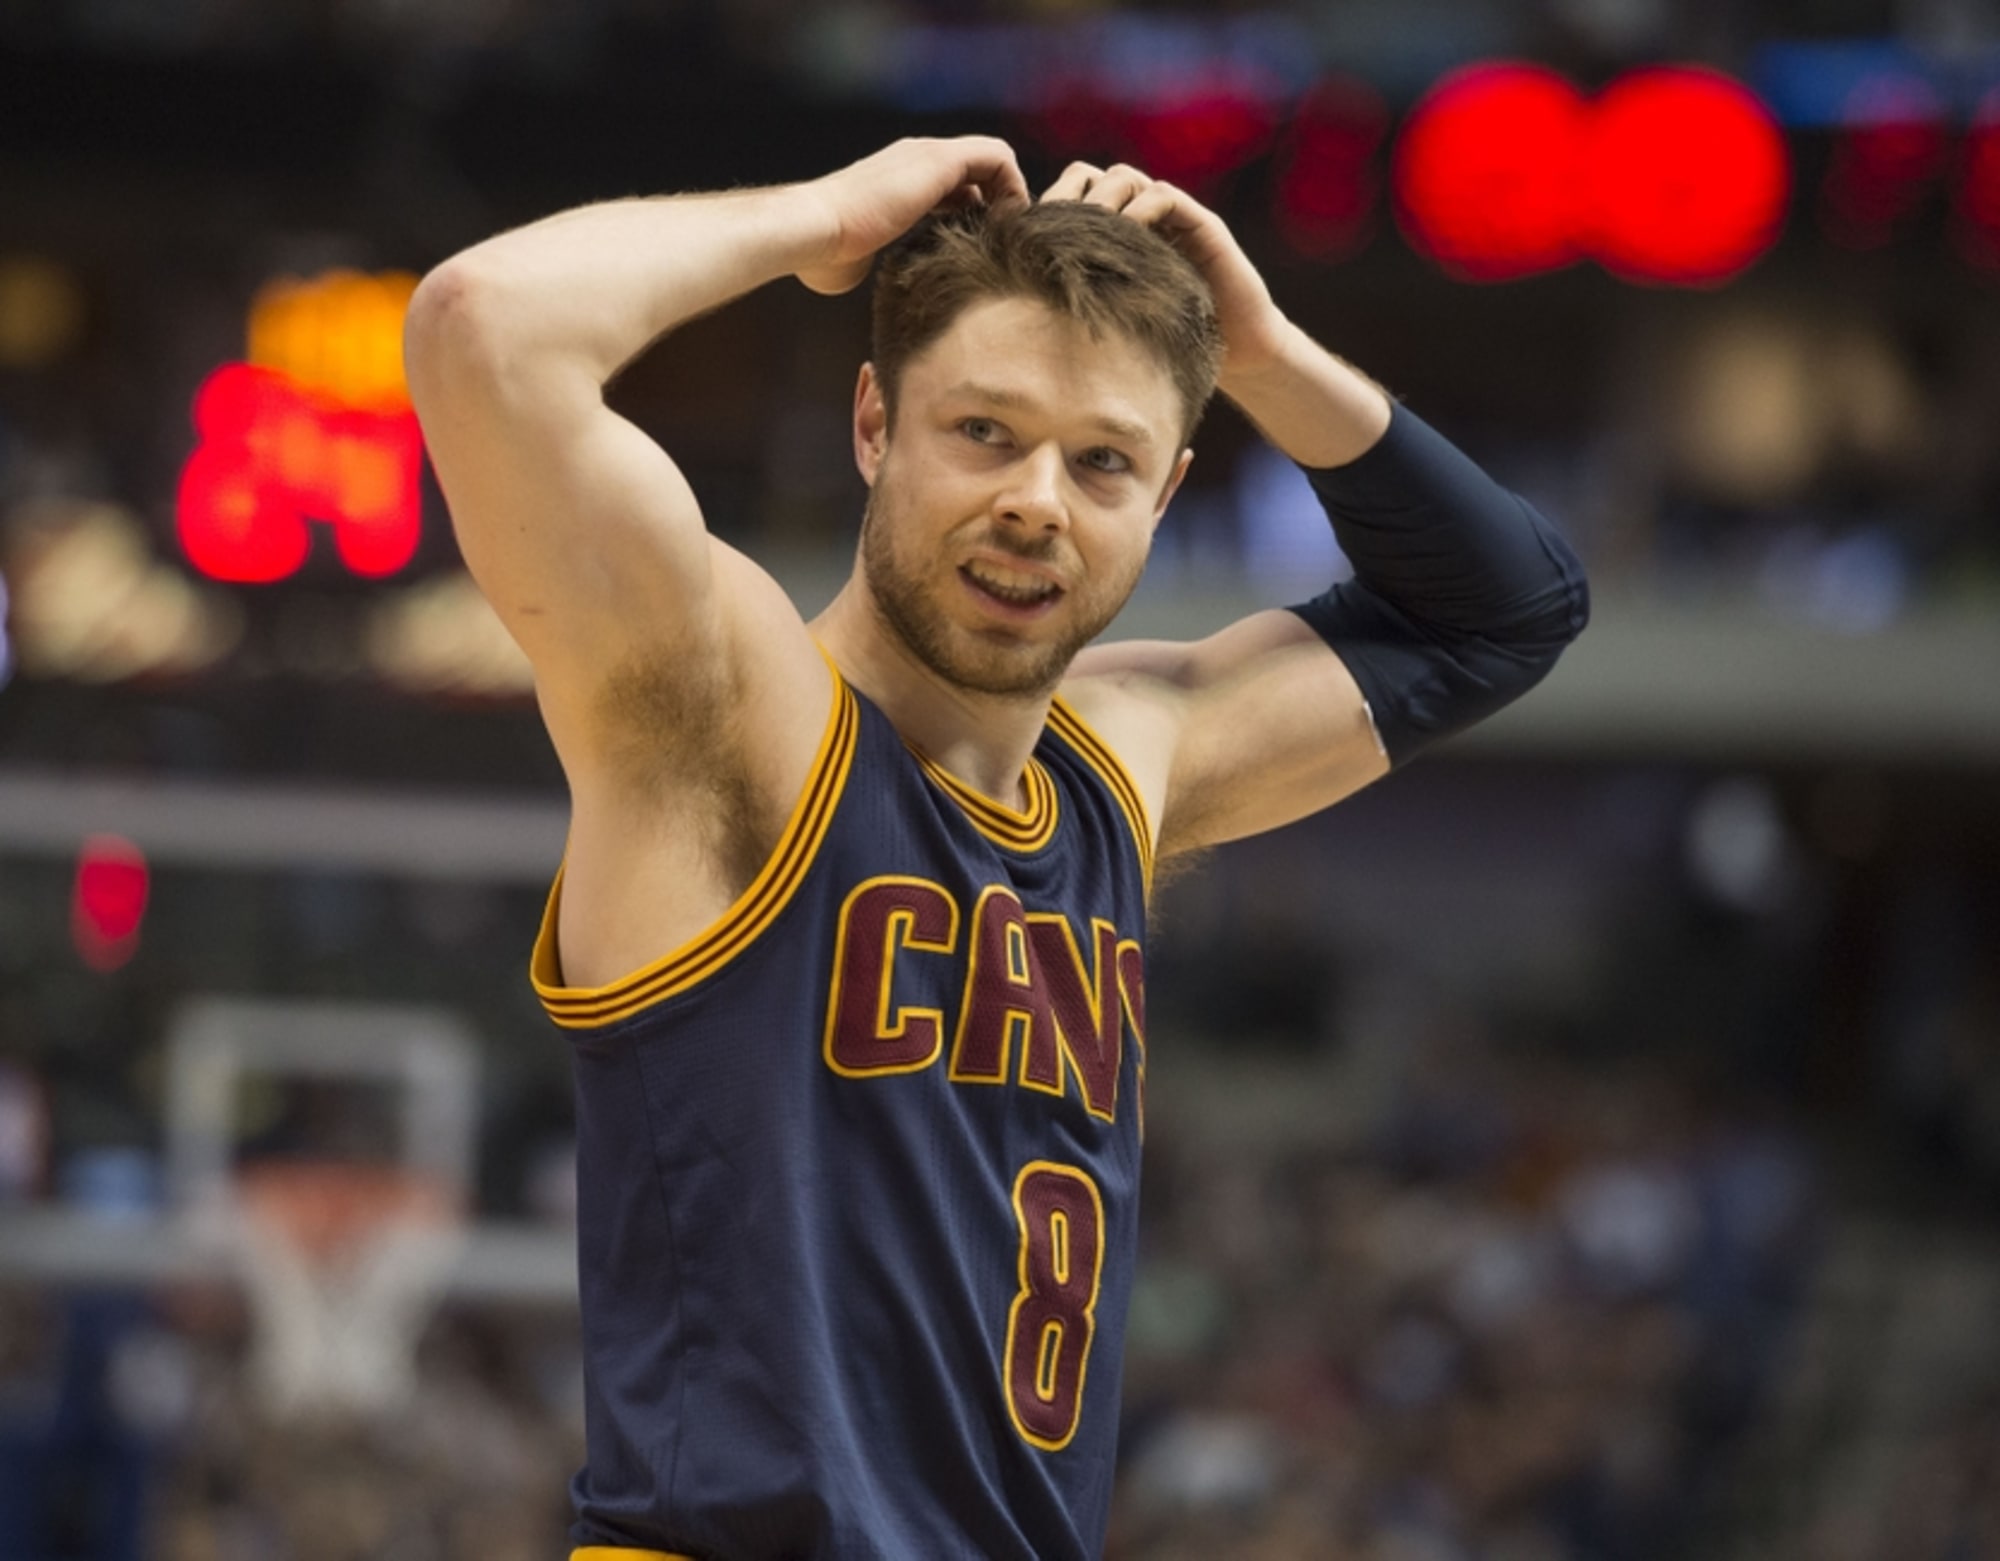 Retirement is an option, if not likely' for Cavaliers' Matthew Dellavedova  - The Athletic